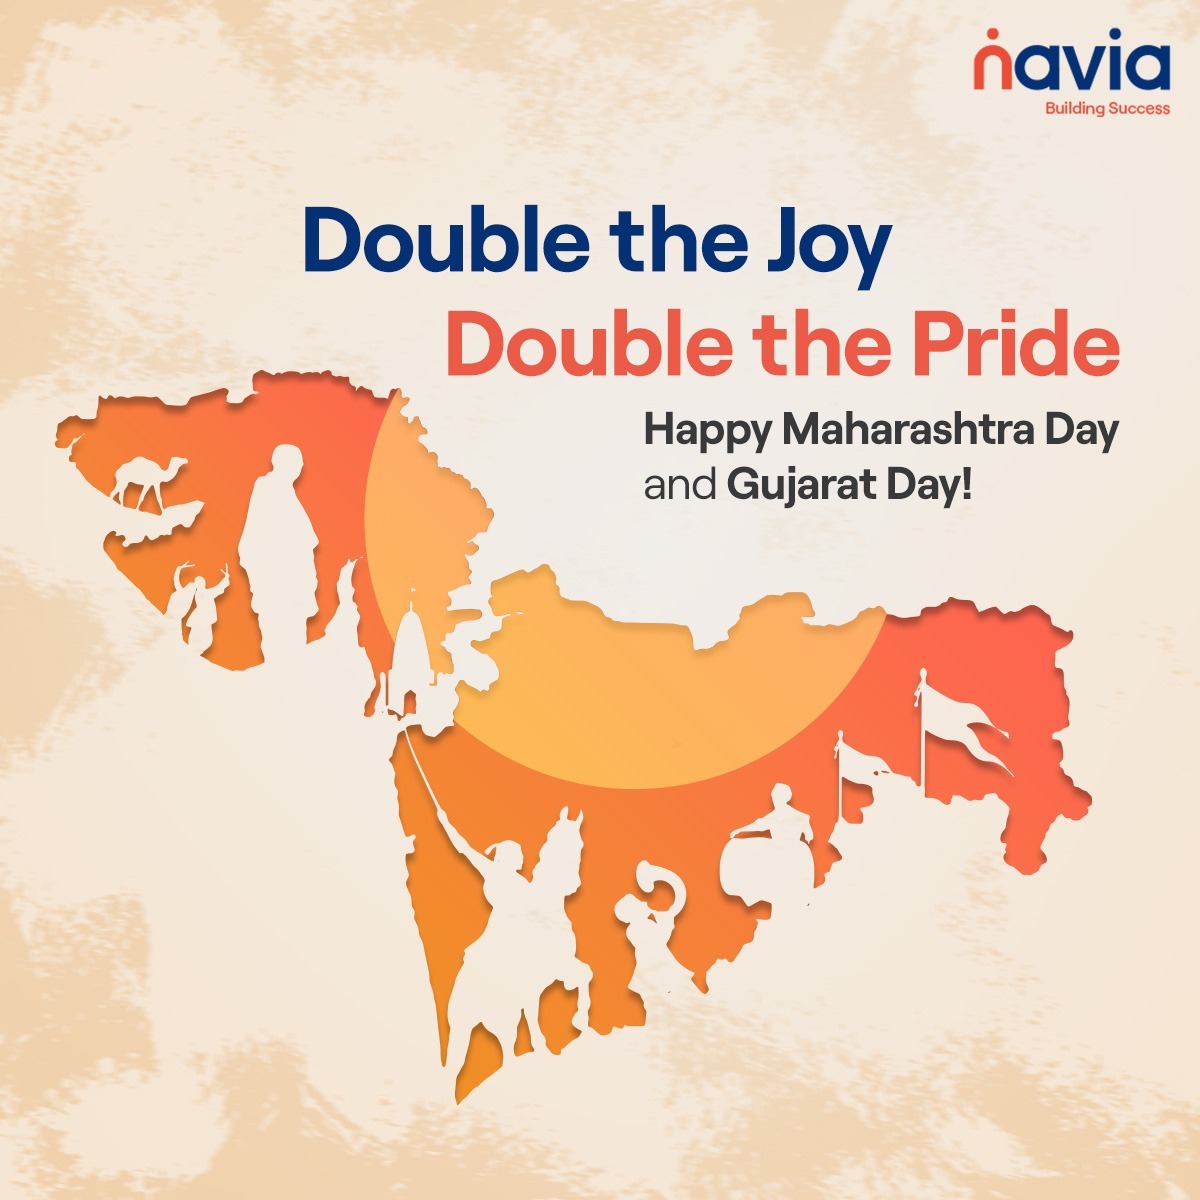 From forts to flavors, Maharashtra & Gujarat have it all! Here's to celebrating their rich heritage!

Happy Maharashtra & Gujarat Day from Navia!

#MaharashtraDay #GujaratDay #Navia #TrustedTradingPartner #TradeSmart #FinancialFreedom #InvestingJourney #StockMarket #Trading